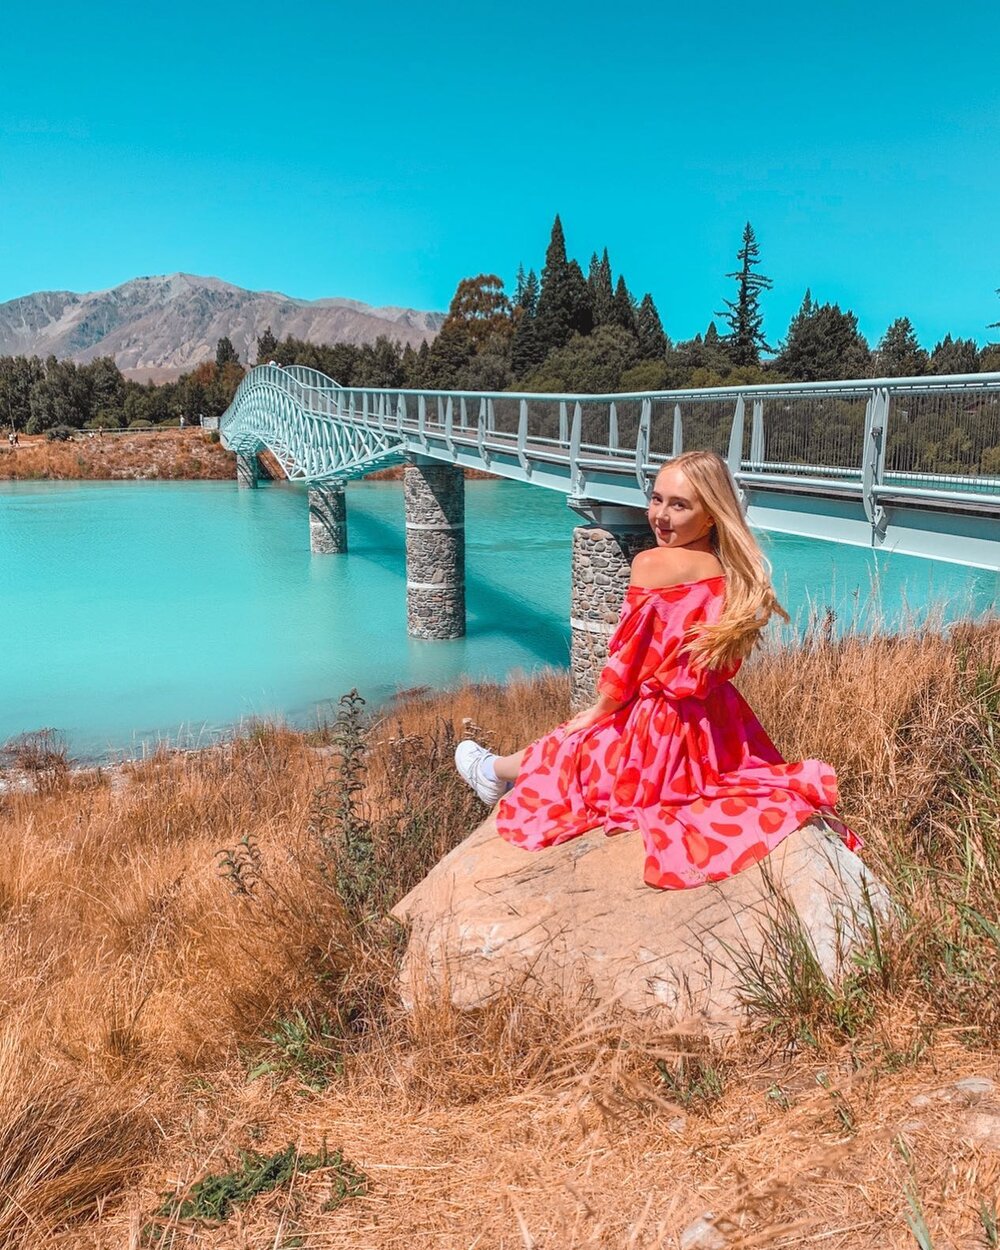 Places like this 🤍

I remember how beautiful the drive was to Lake Tekapo! That morning we had driven from Christchurch to Akaroa and taken the beautiful scenic roads through the South Island ti arrive at Lake Tekapo.

Check out how gorgeous this sp